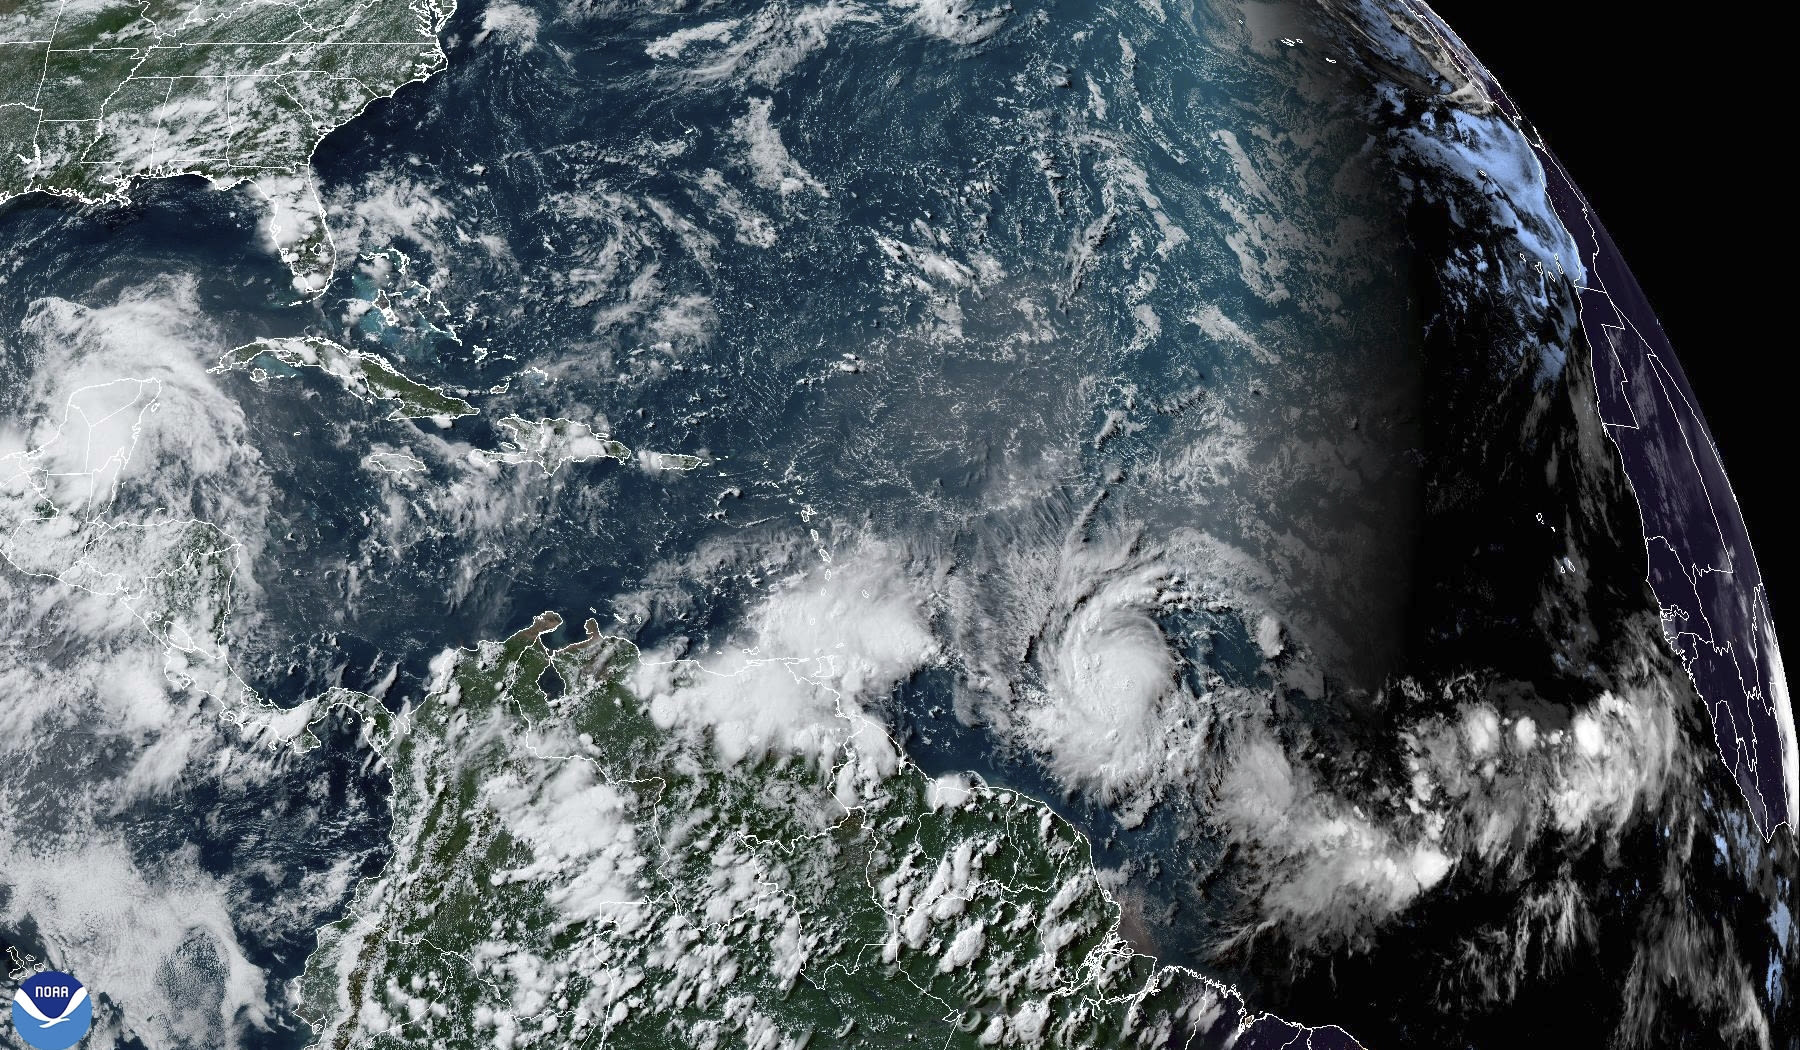 Beryl strengthens into hurricane in Atlantic, forecast to become major storm